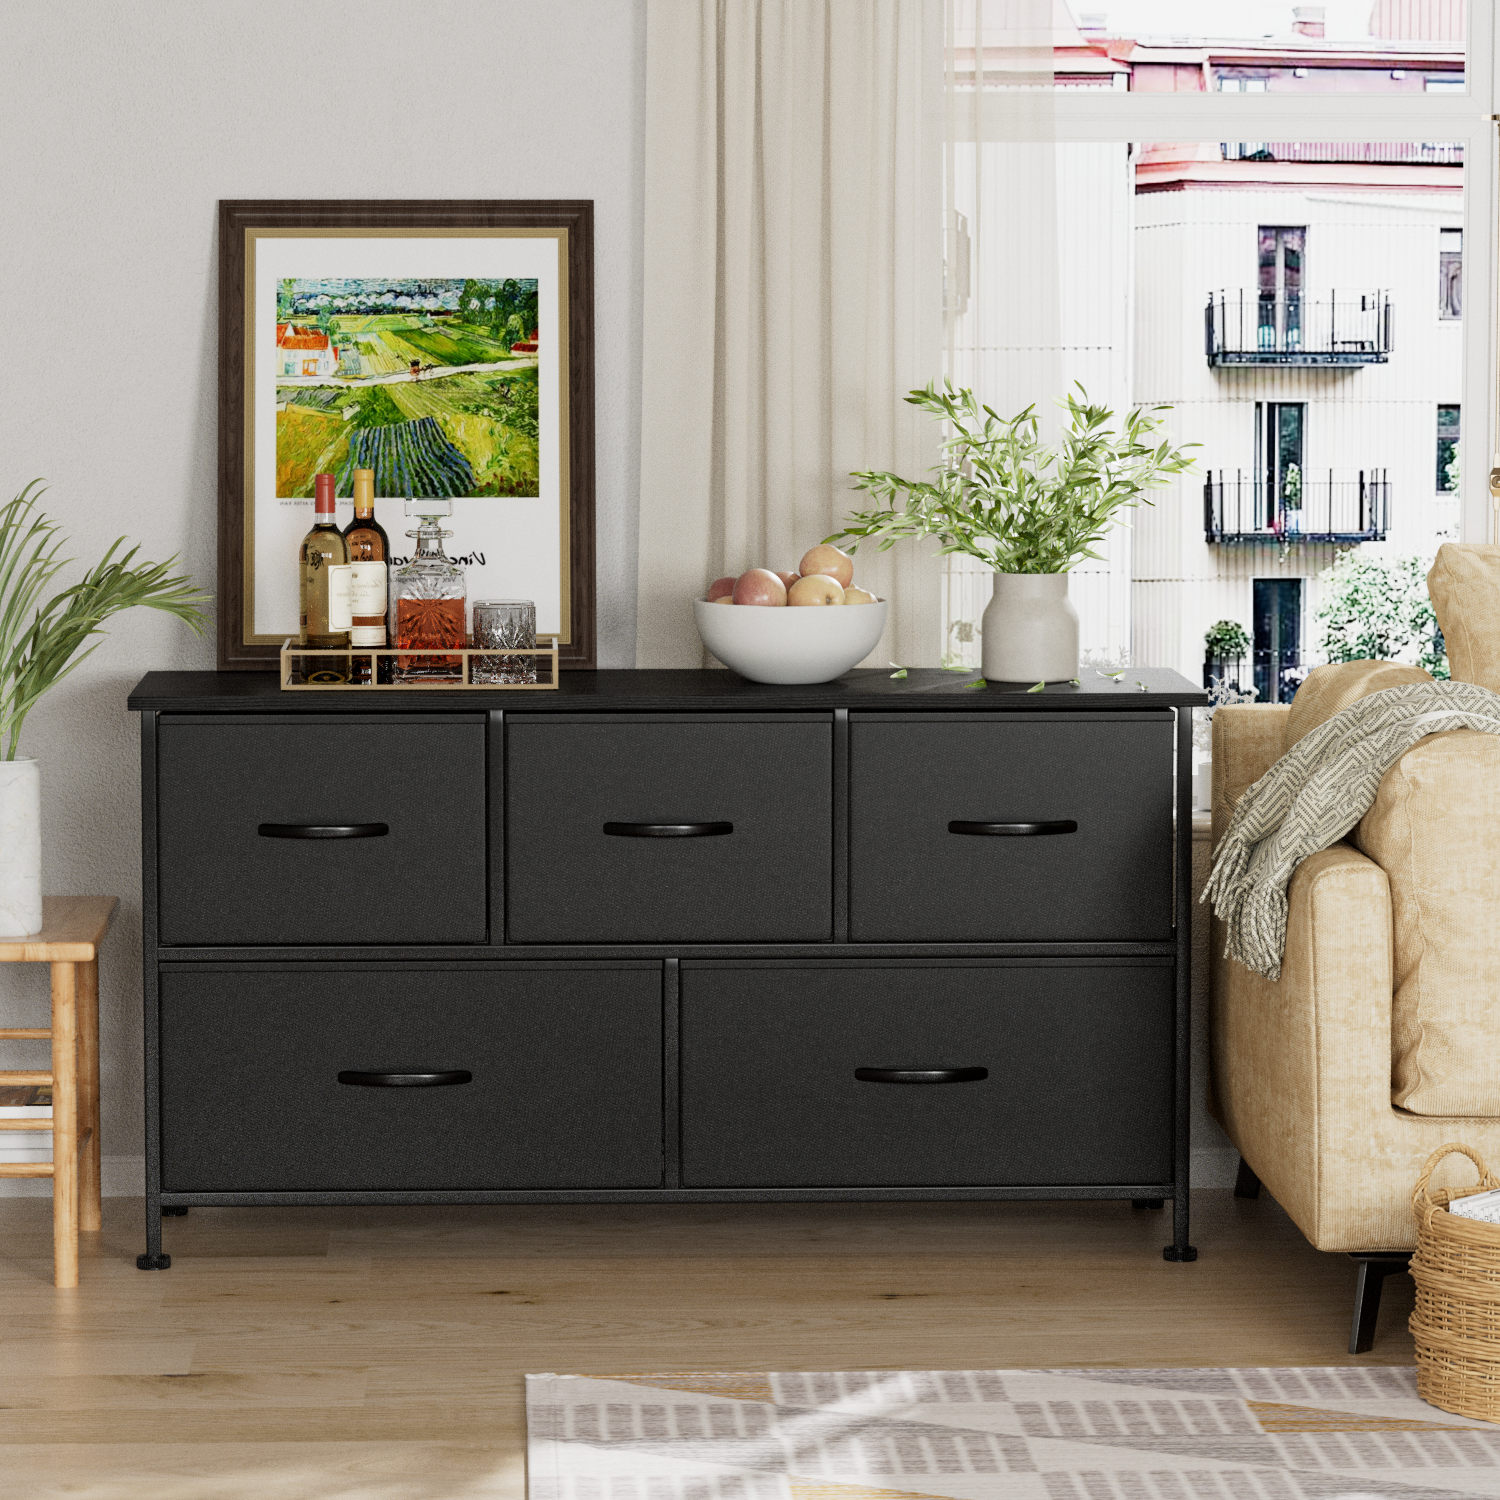 Vineego Dresser for Bedroom with 5 Drawers, Wide Chest of Drawers, Fabric Dresser,Black - image 2 of 7